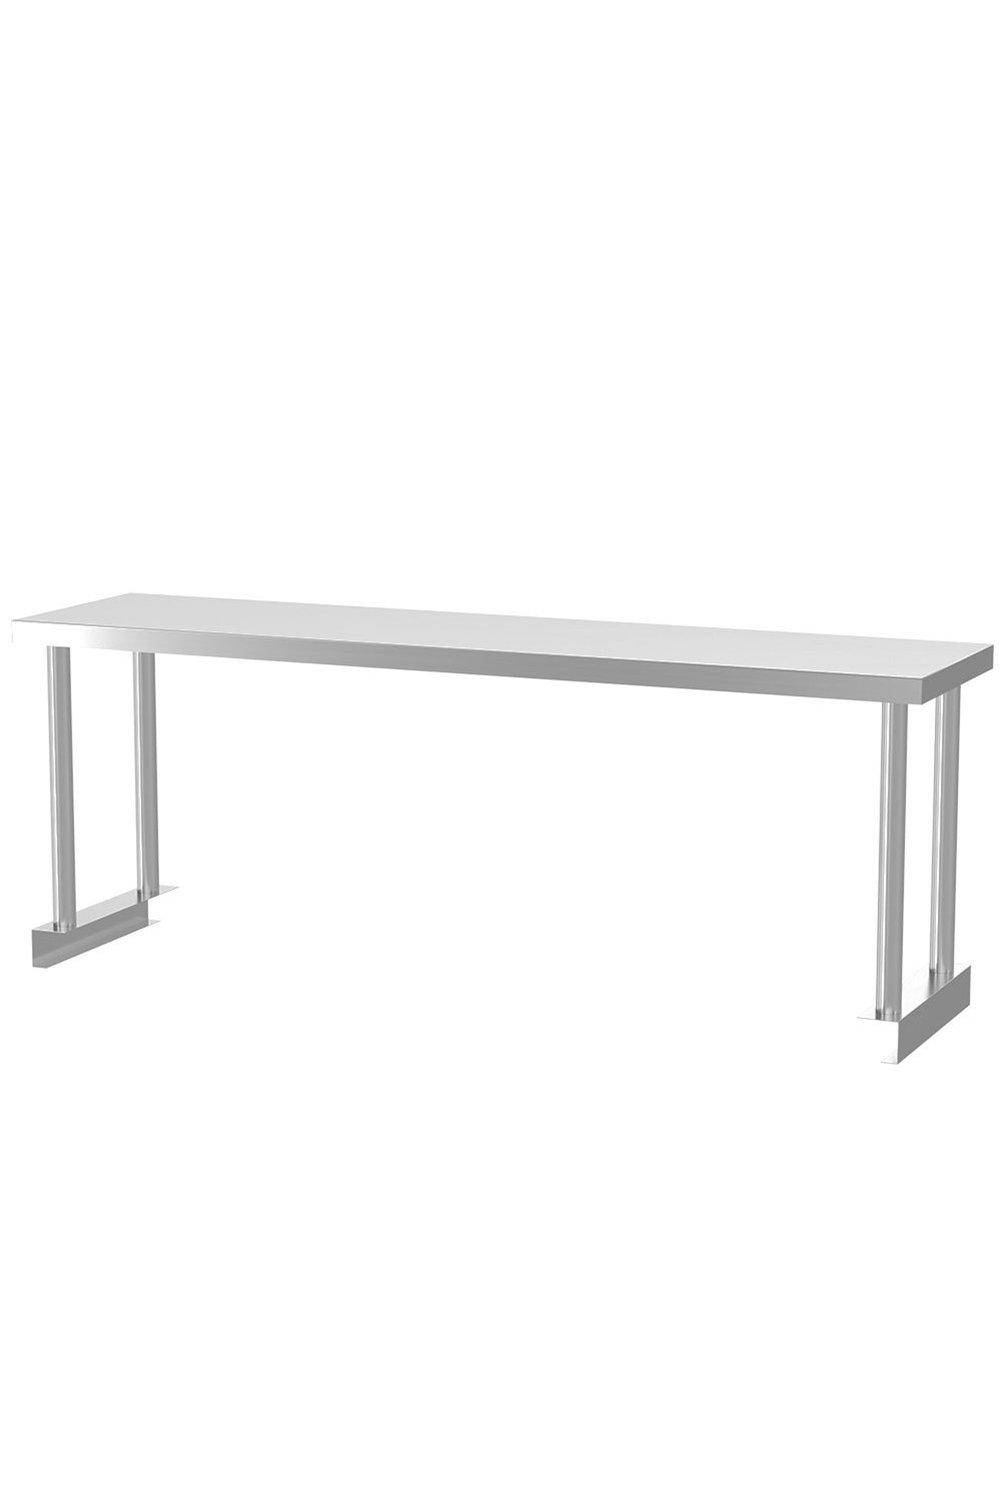 Stainless Steel Catering Table Top Bench Over Shelf Kitchen Worktop Commercial